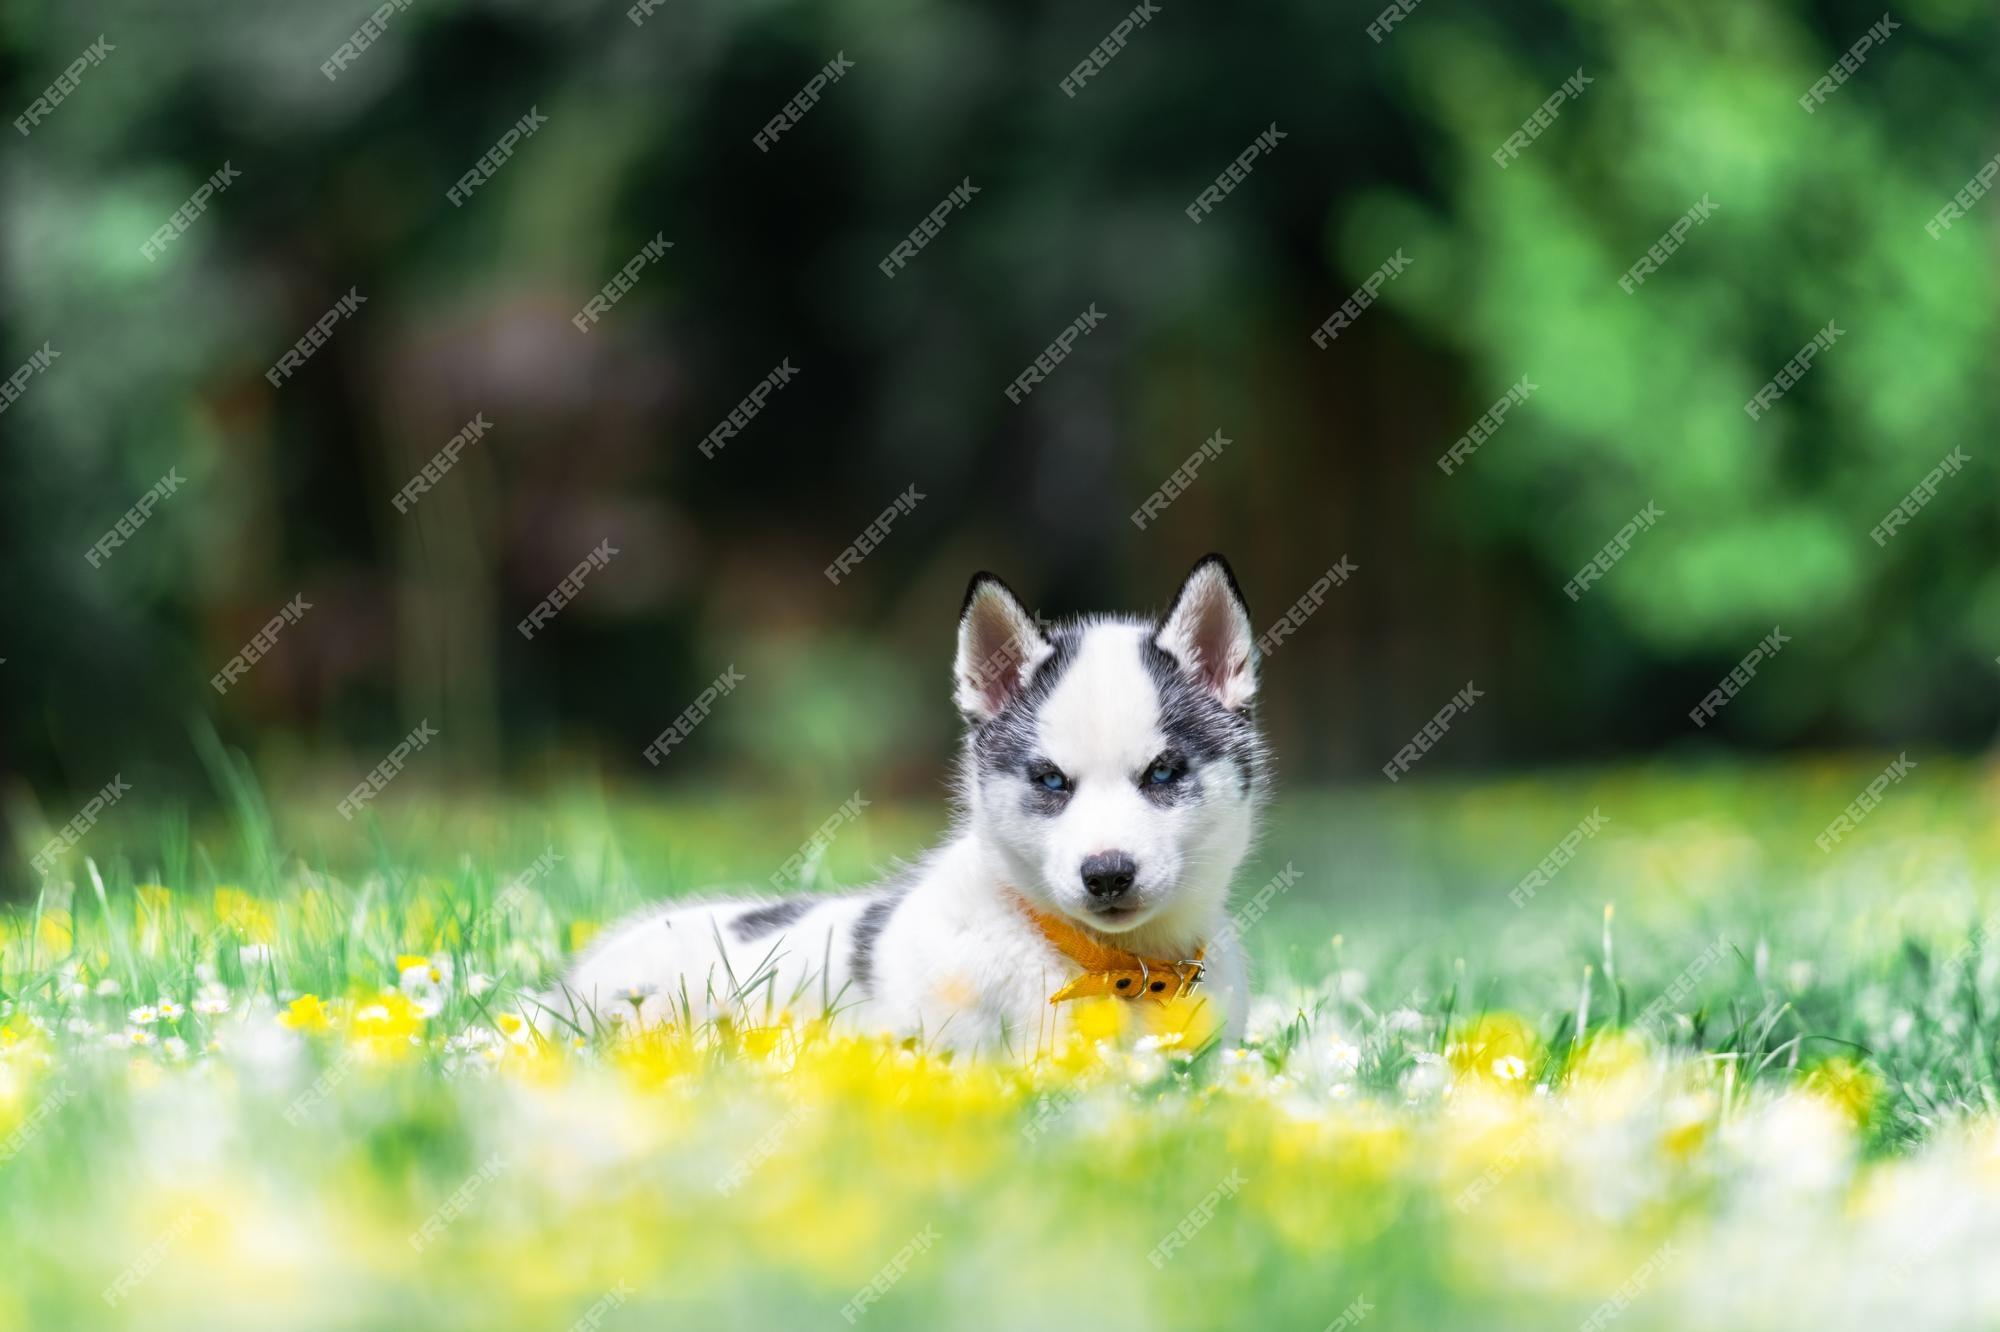 Premium Photo A Small White Dog Puppy Breed Siberian Husky With